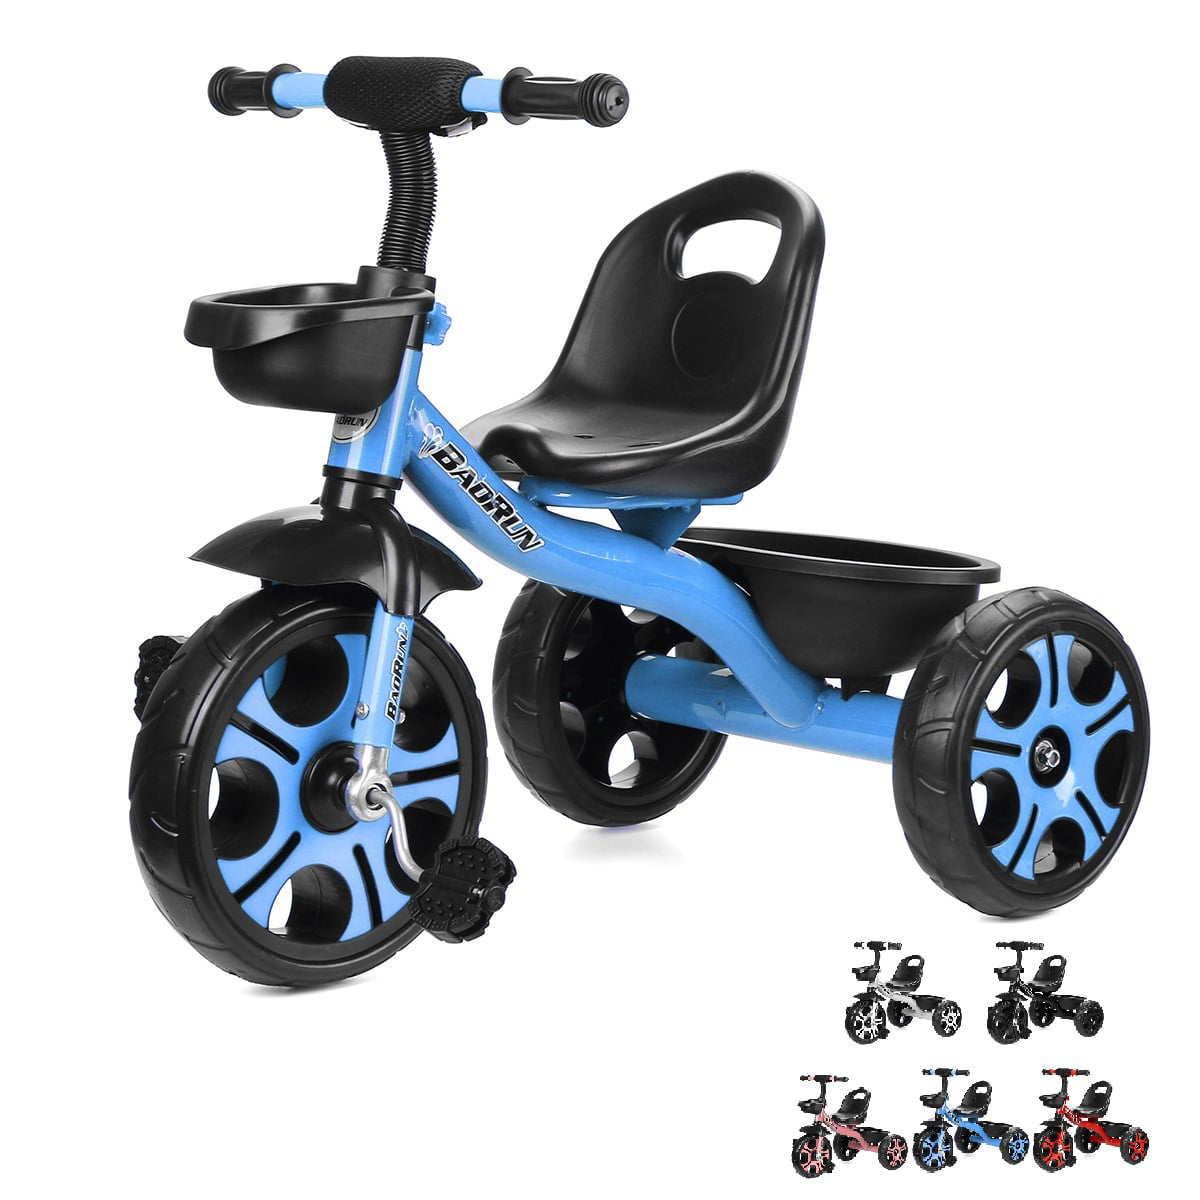 Kids Tricycle Bike Children Trike Bicycle Holder Balance Activity Play Outdoor 